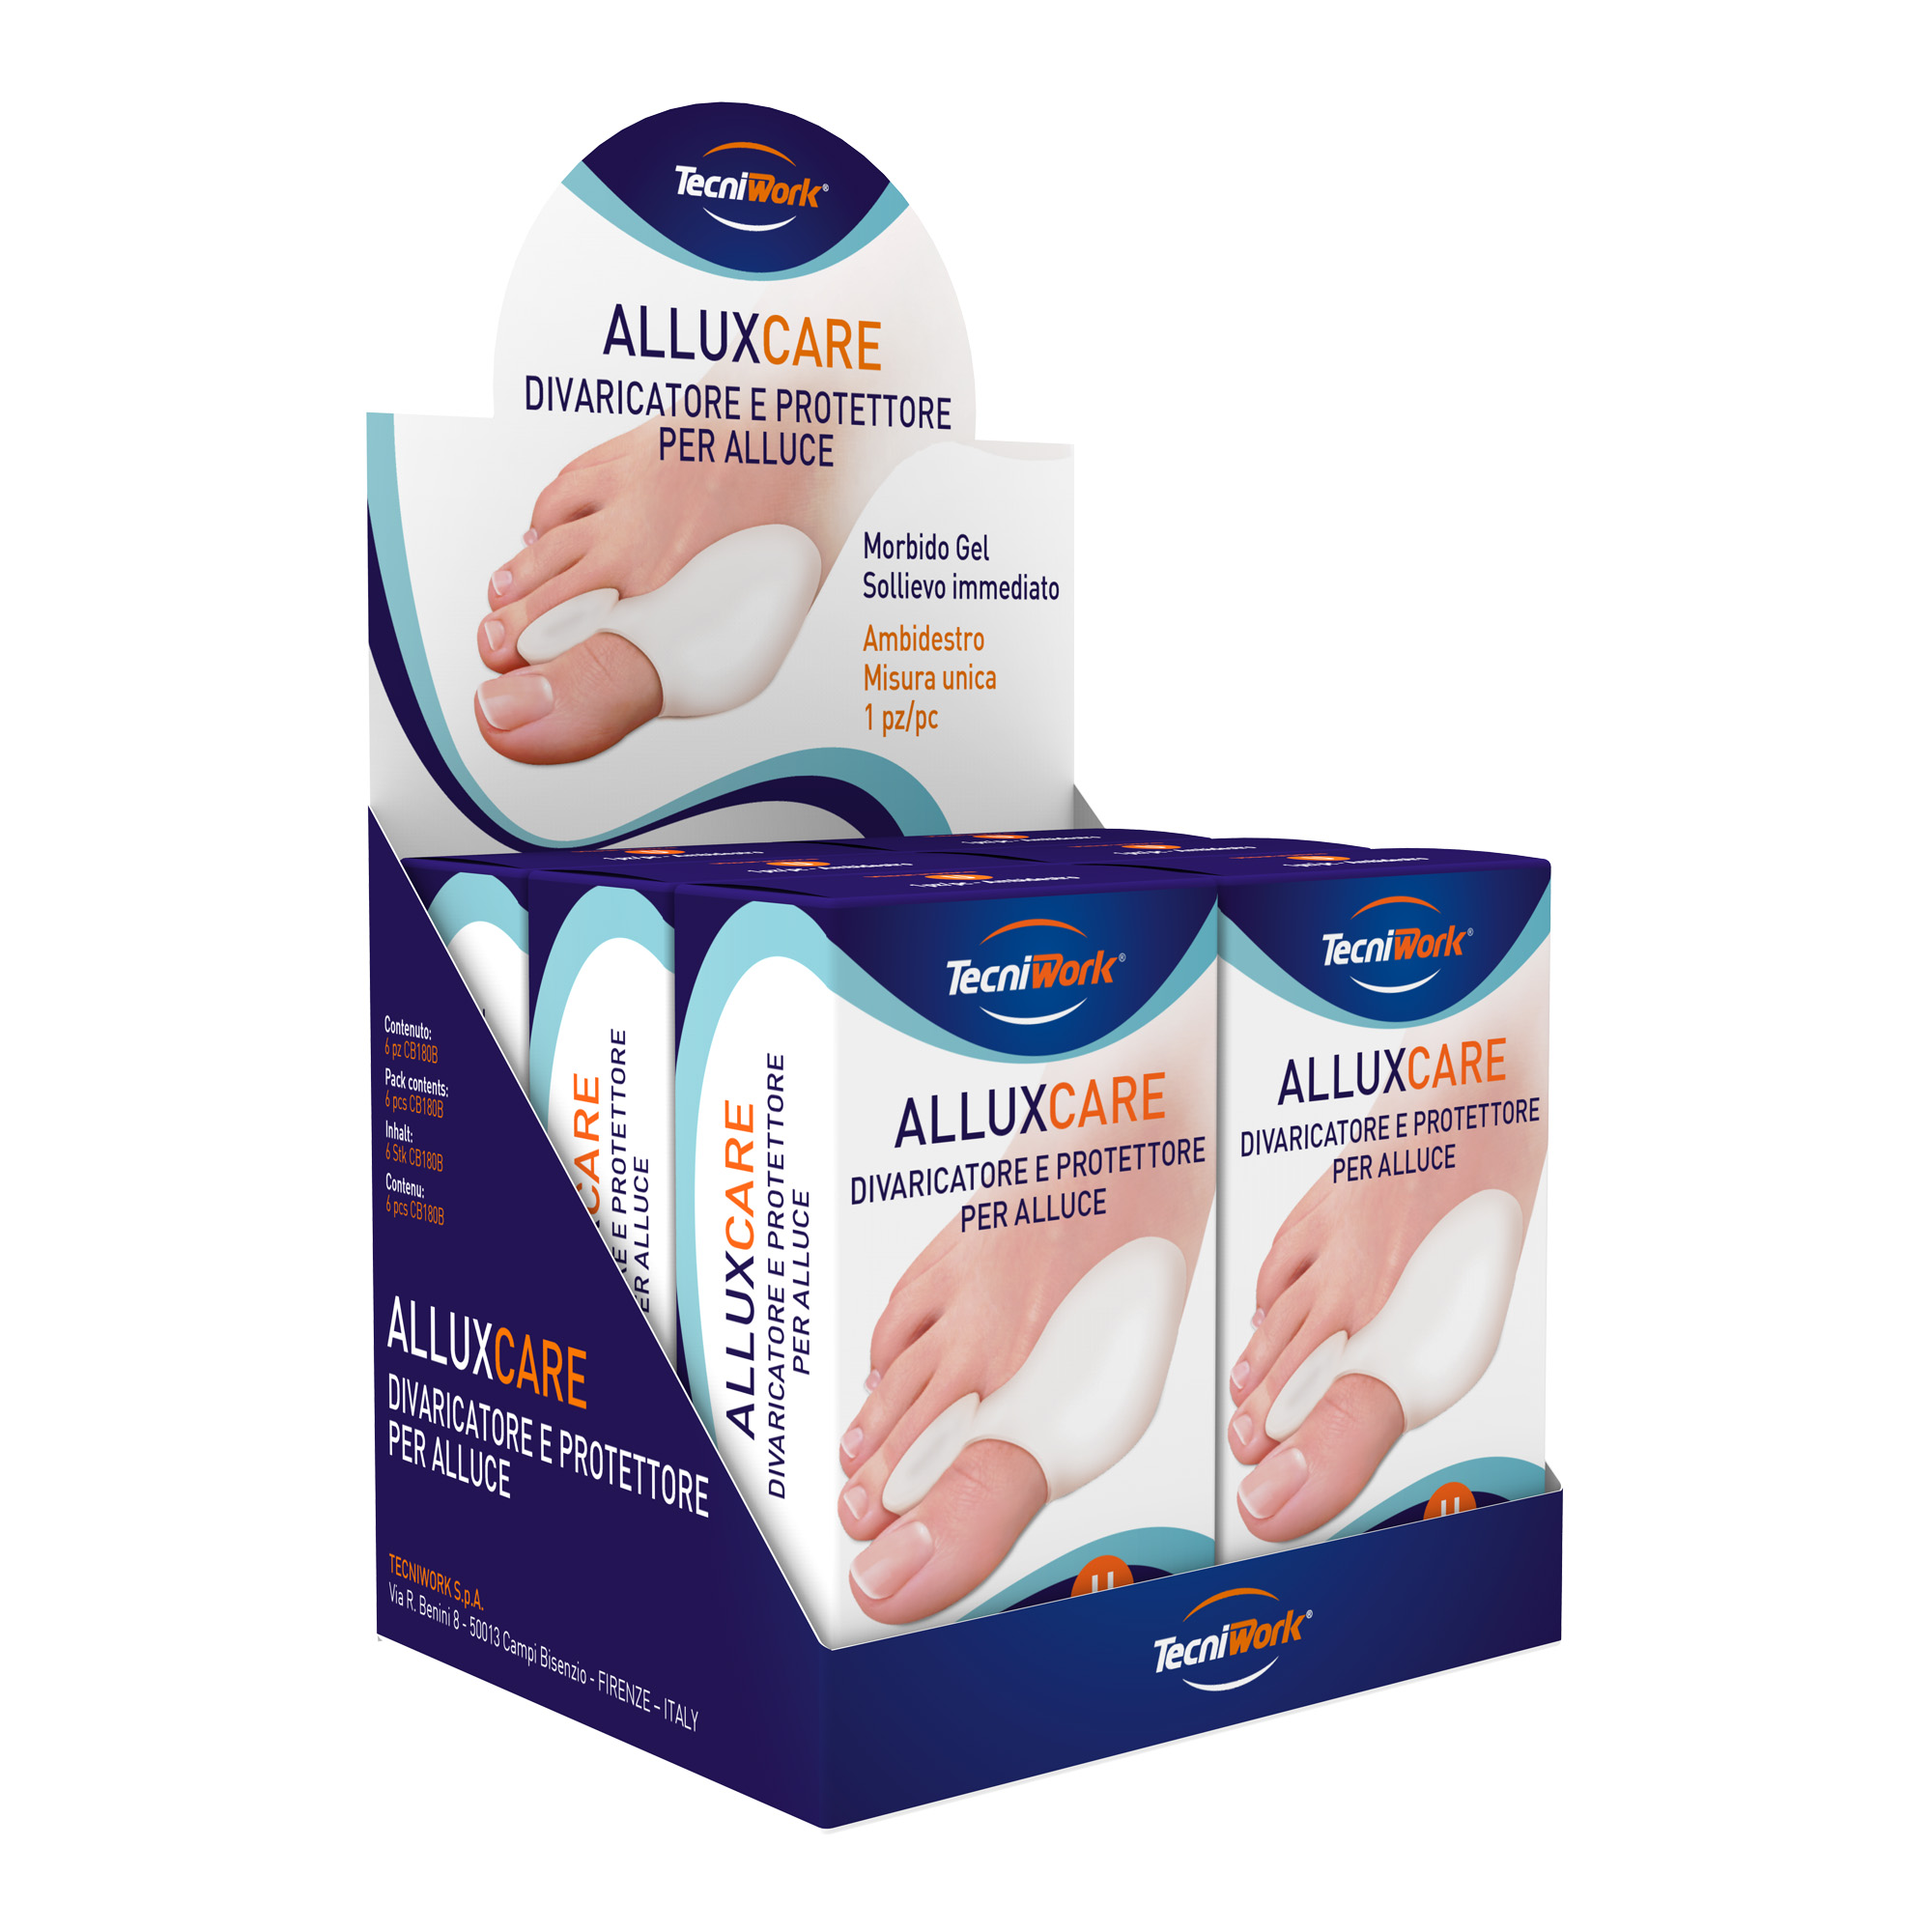 Alluxcare gel toe spreader and protector 6-box display